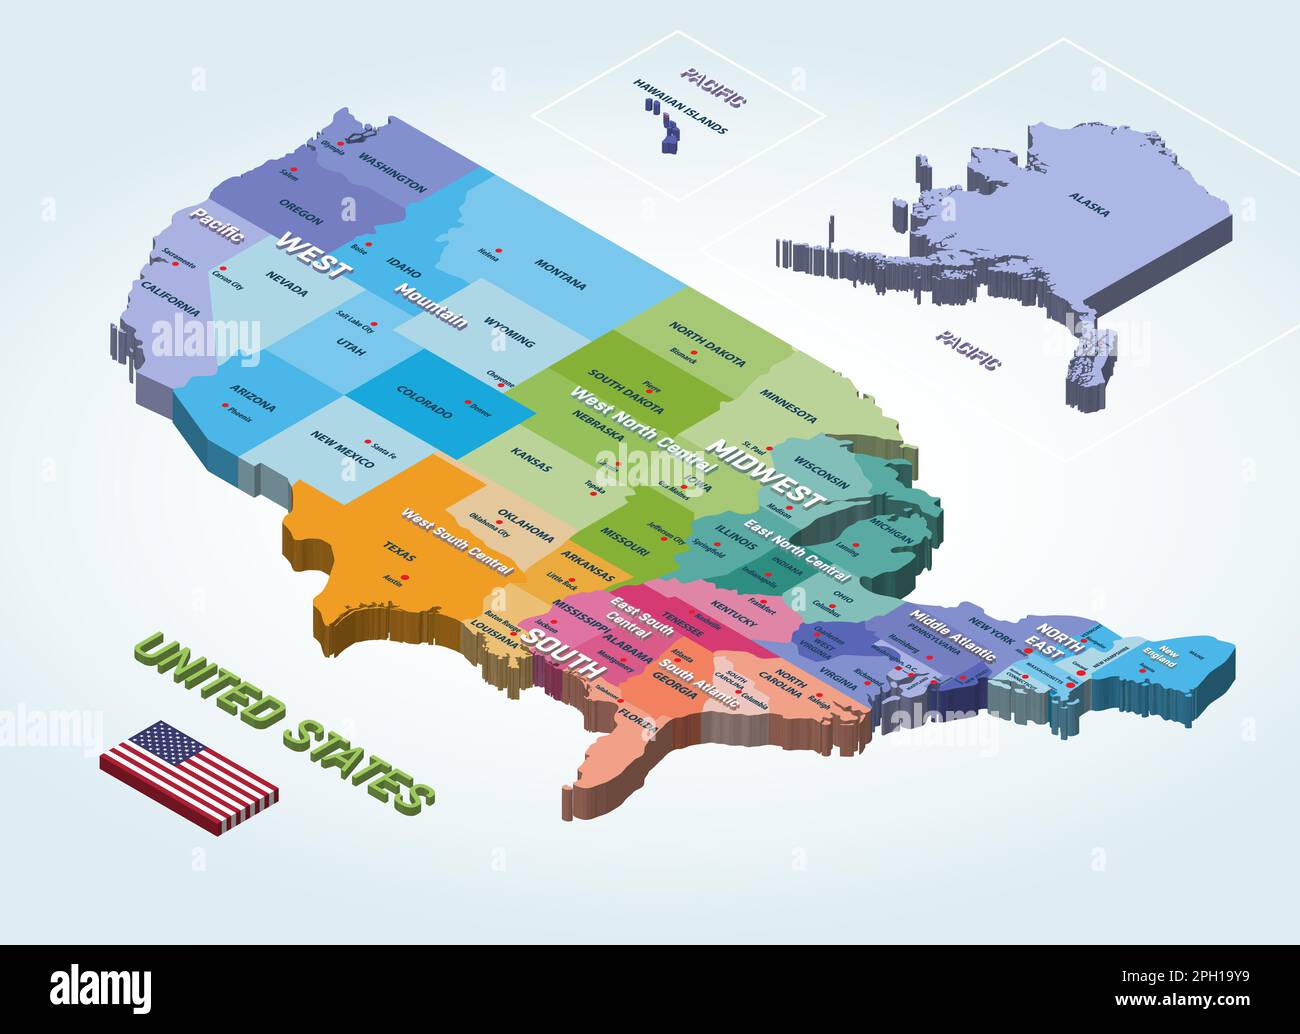 United States isometric map colored by regions Stock Vector